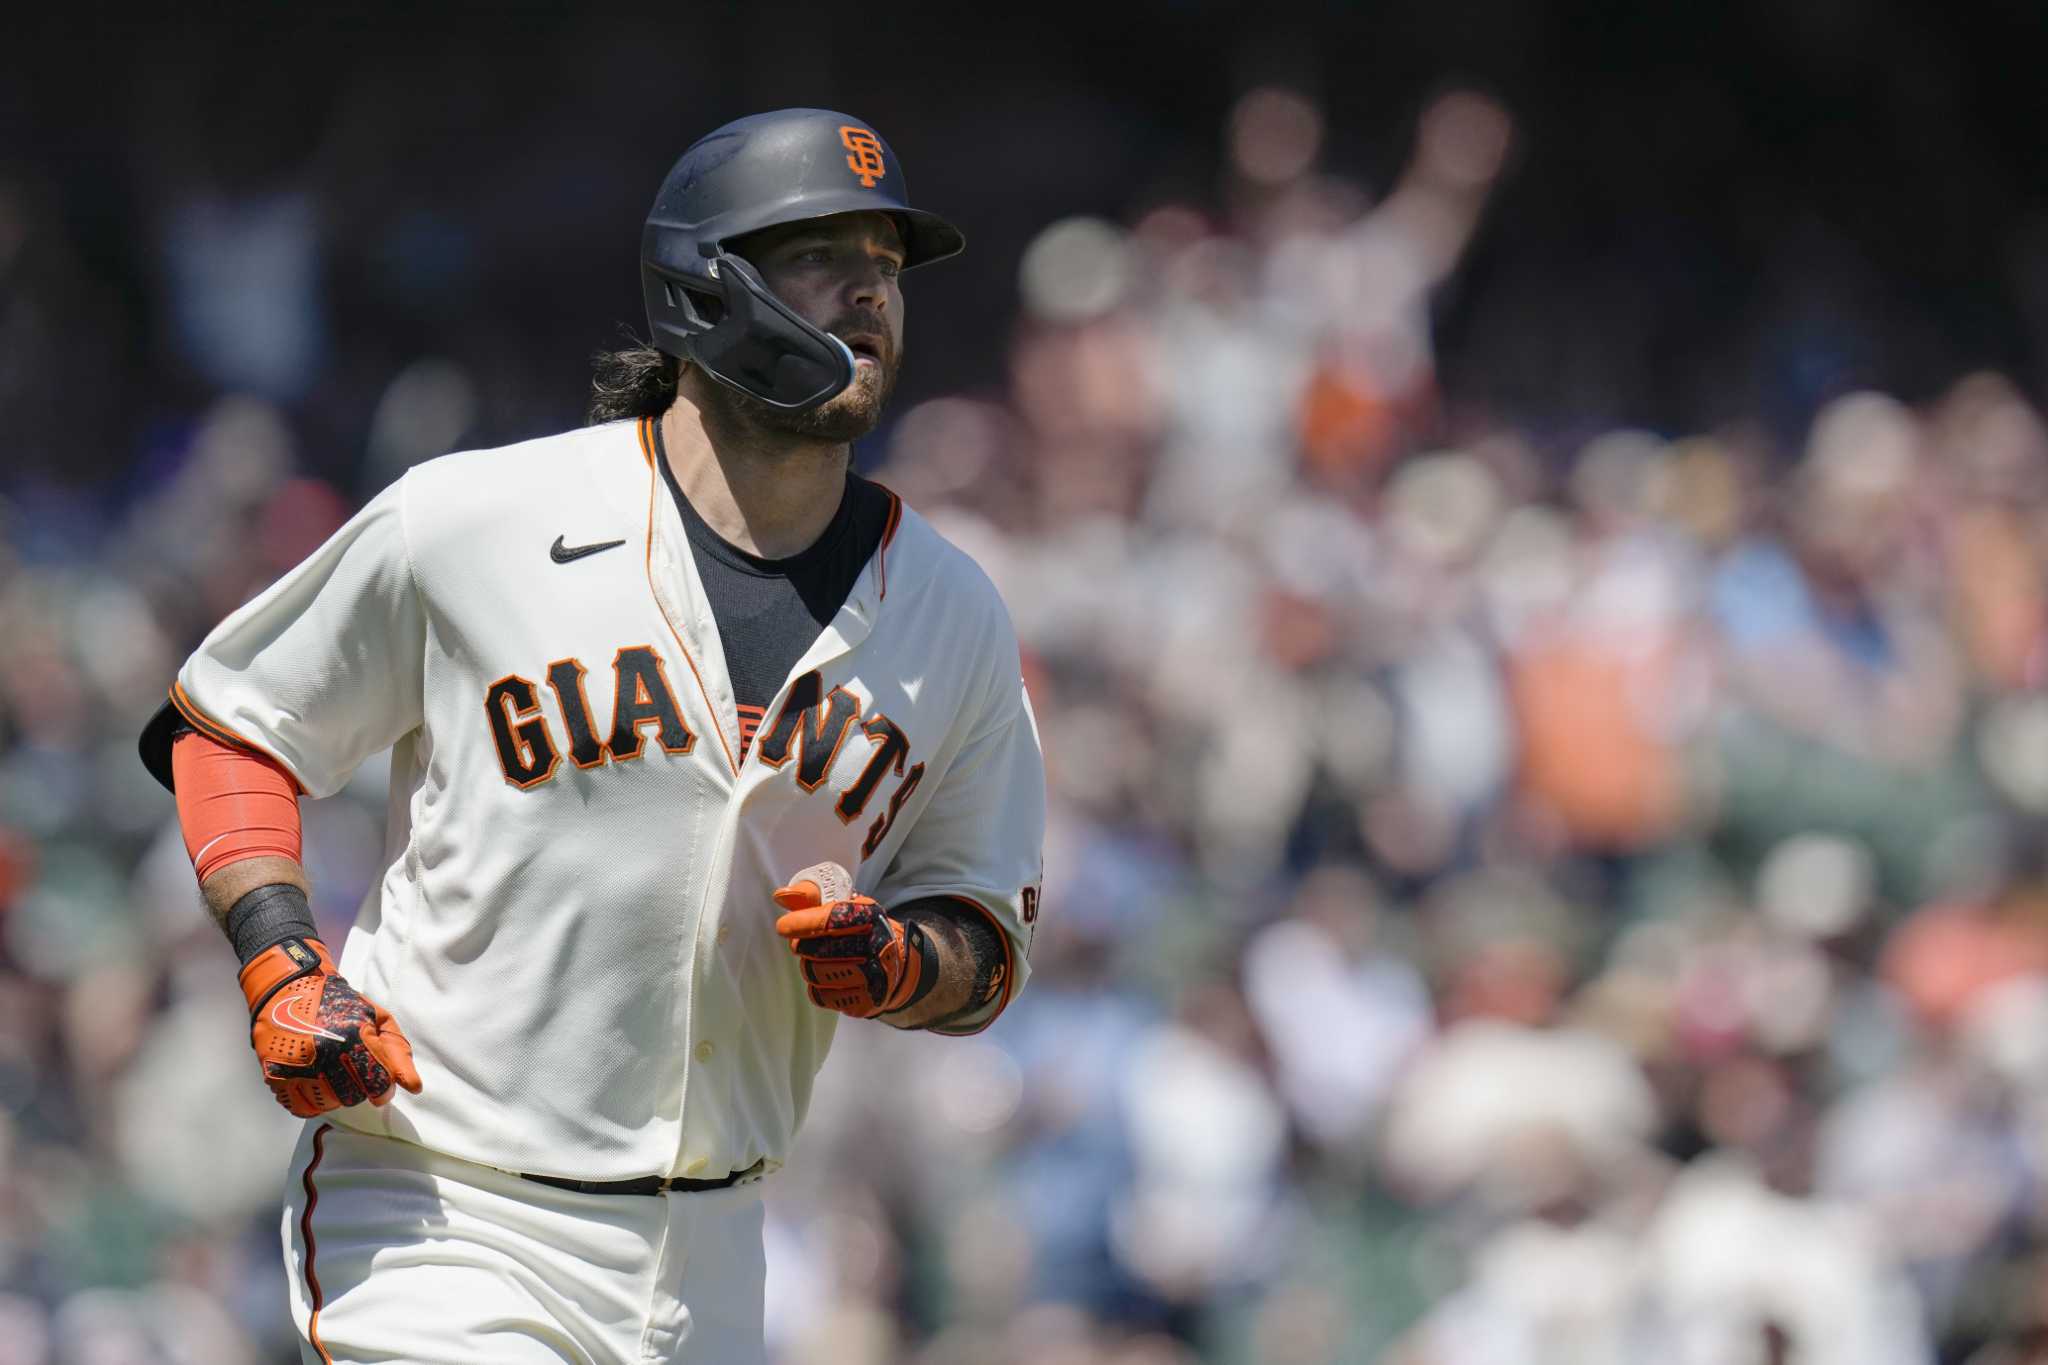 Infielder J.D. Davis grateful to play in the Bay Area: It's a